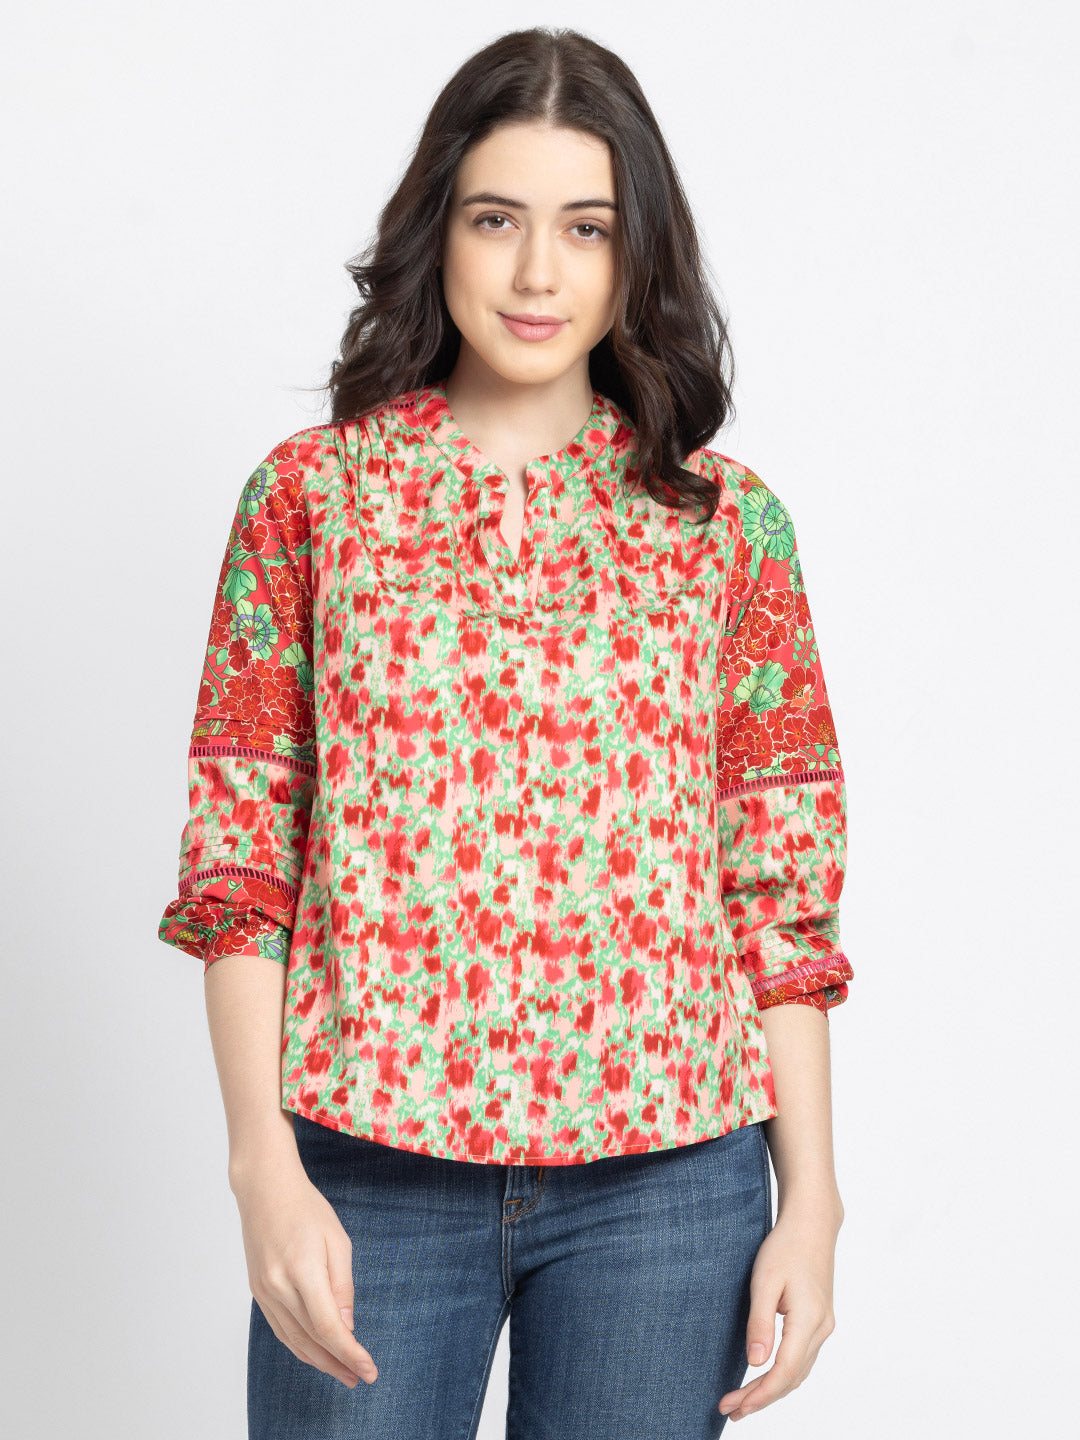 Blossom Top from Shaye , for women